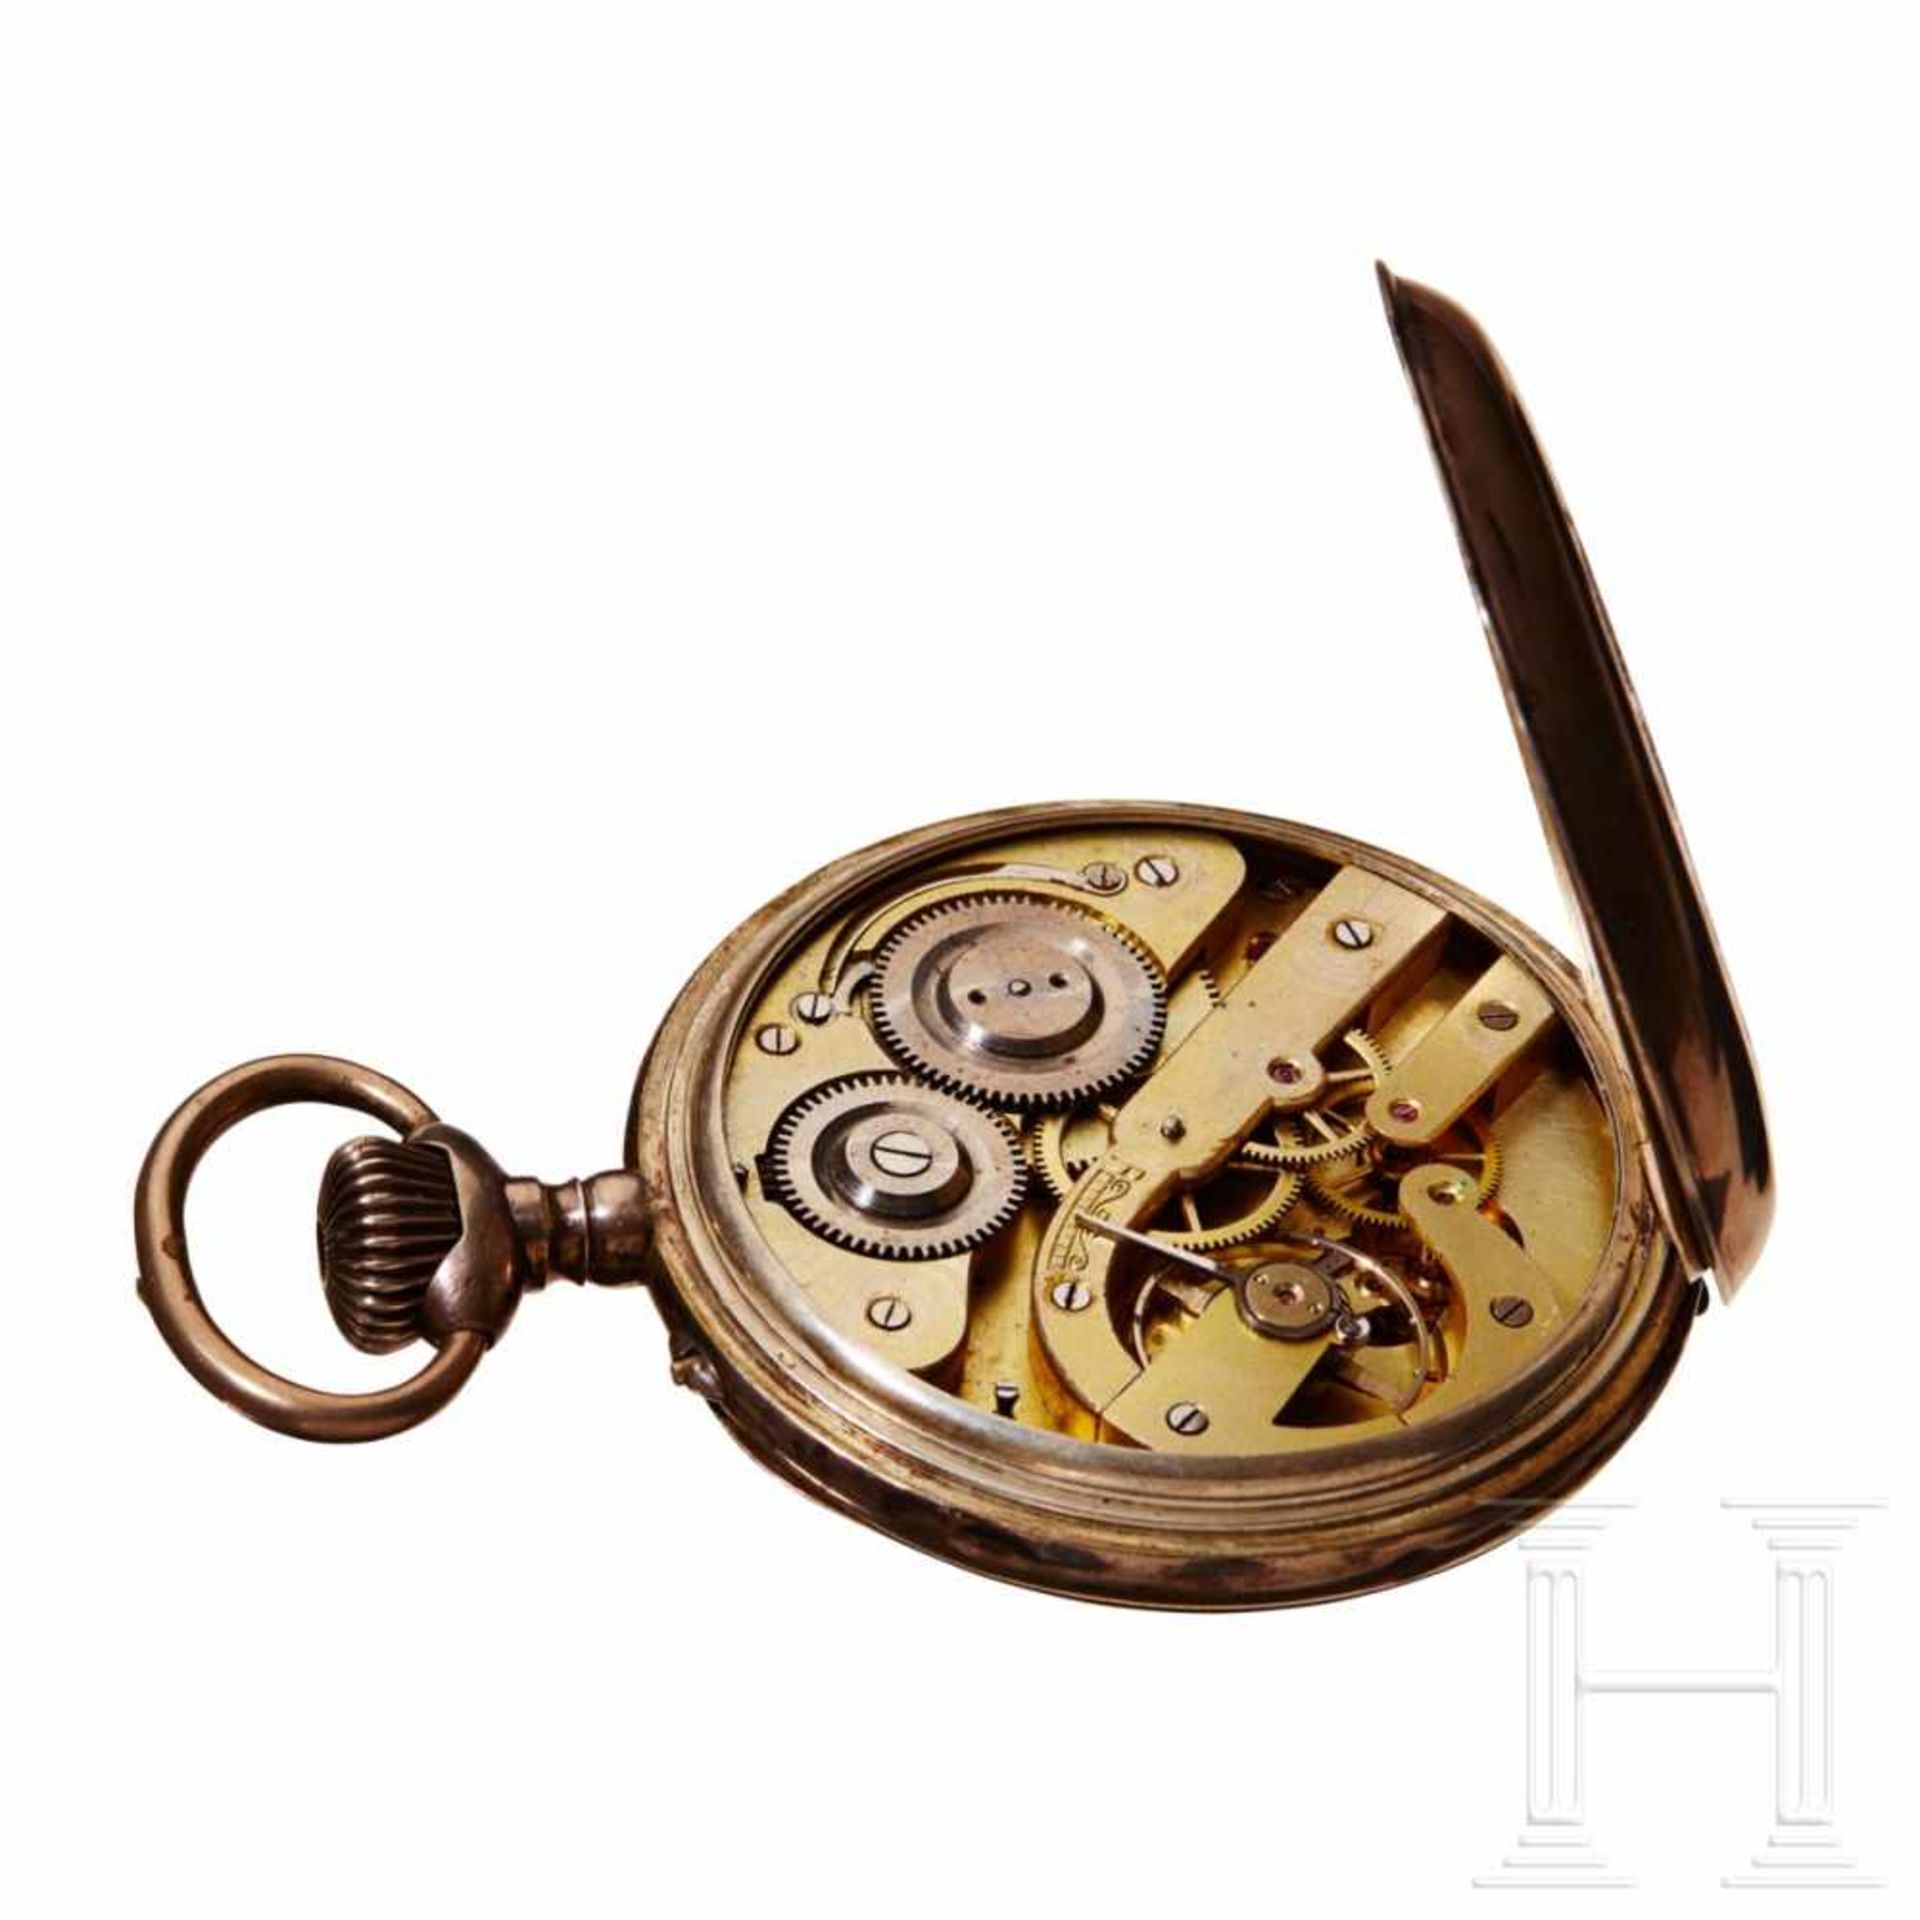 A Bavarian Pocket WatchLarge, silver pocket watch with engraved Royal Bavarian Coat of Arms. A watch - Bild 3 aus 4